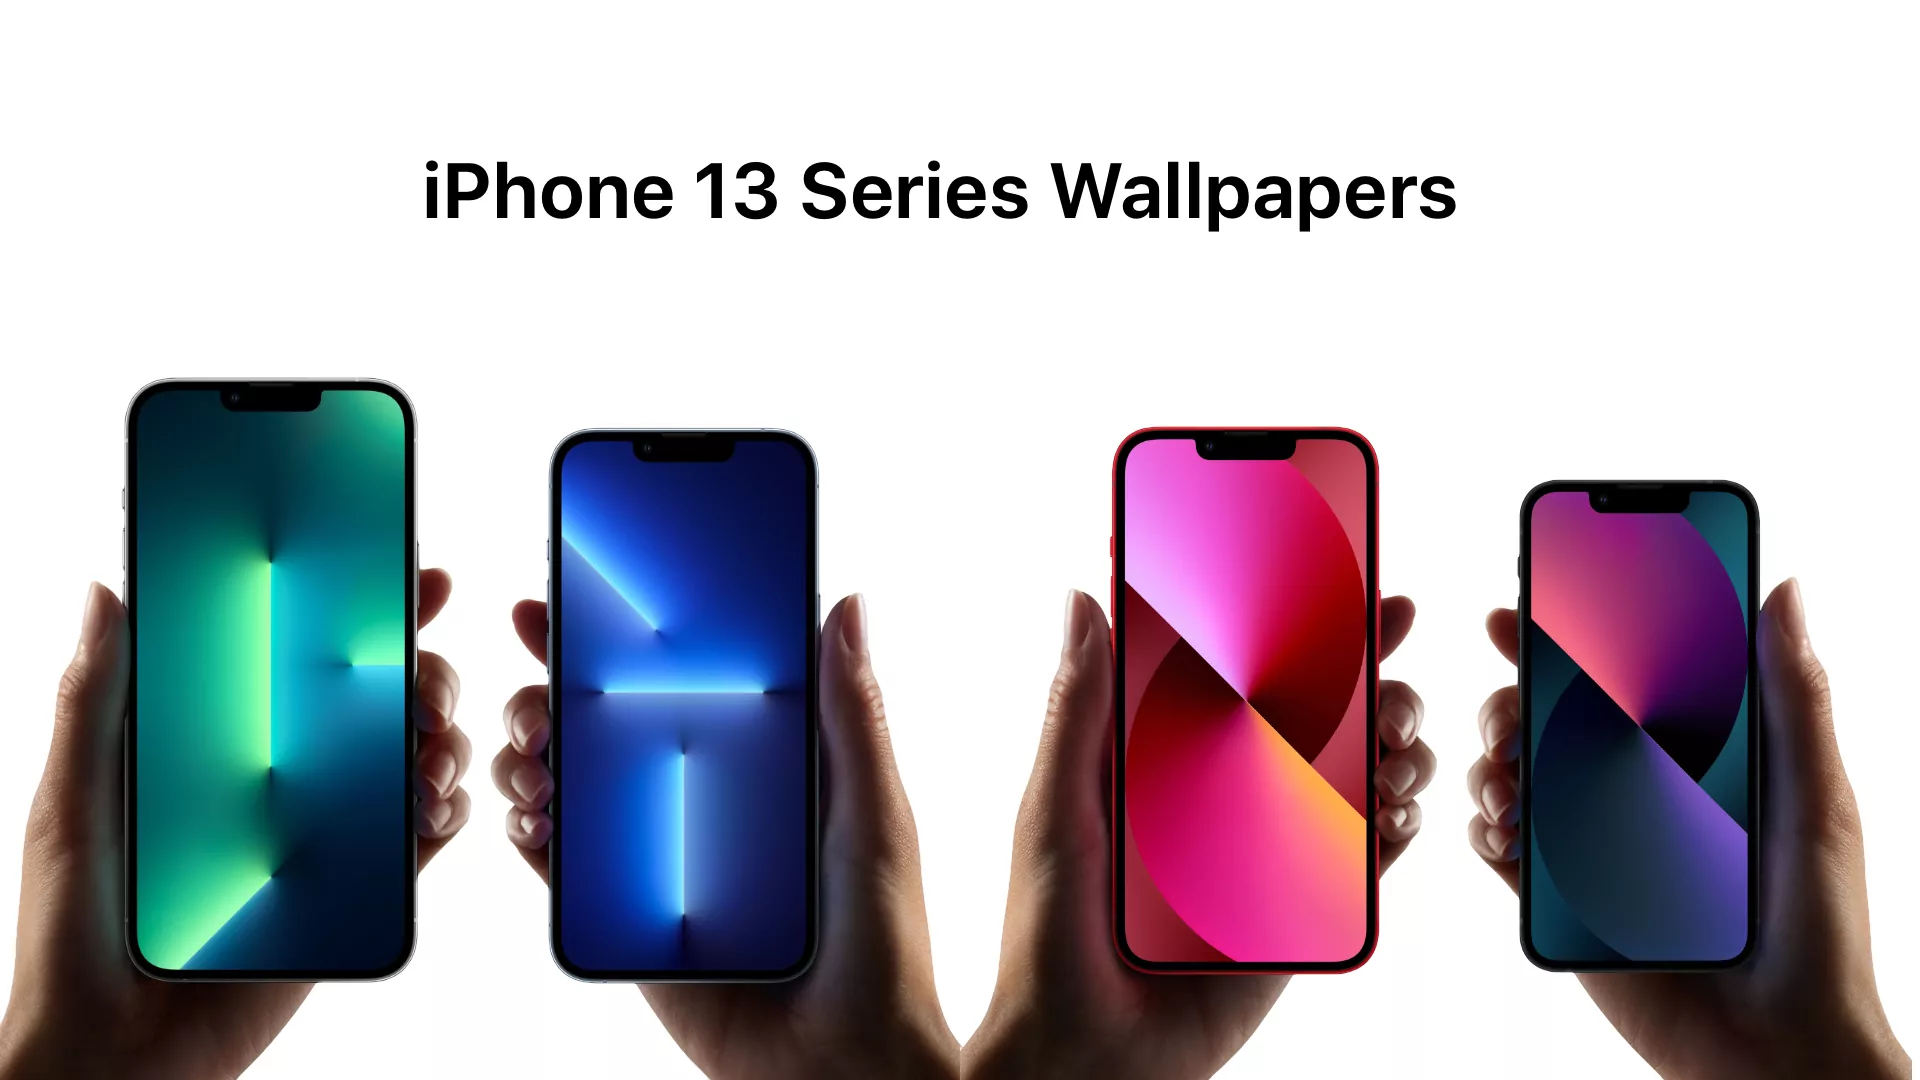 Apple iPhone 13/iPhone 13 Pro Wallpapers 4K Download - Mobile Tech 360